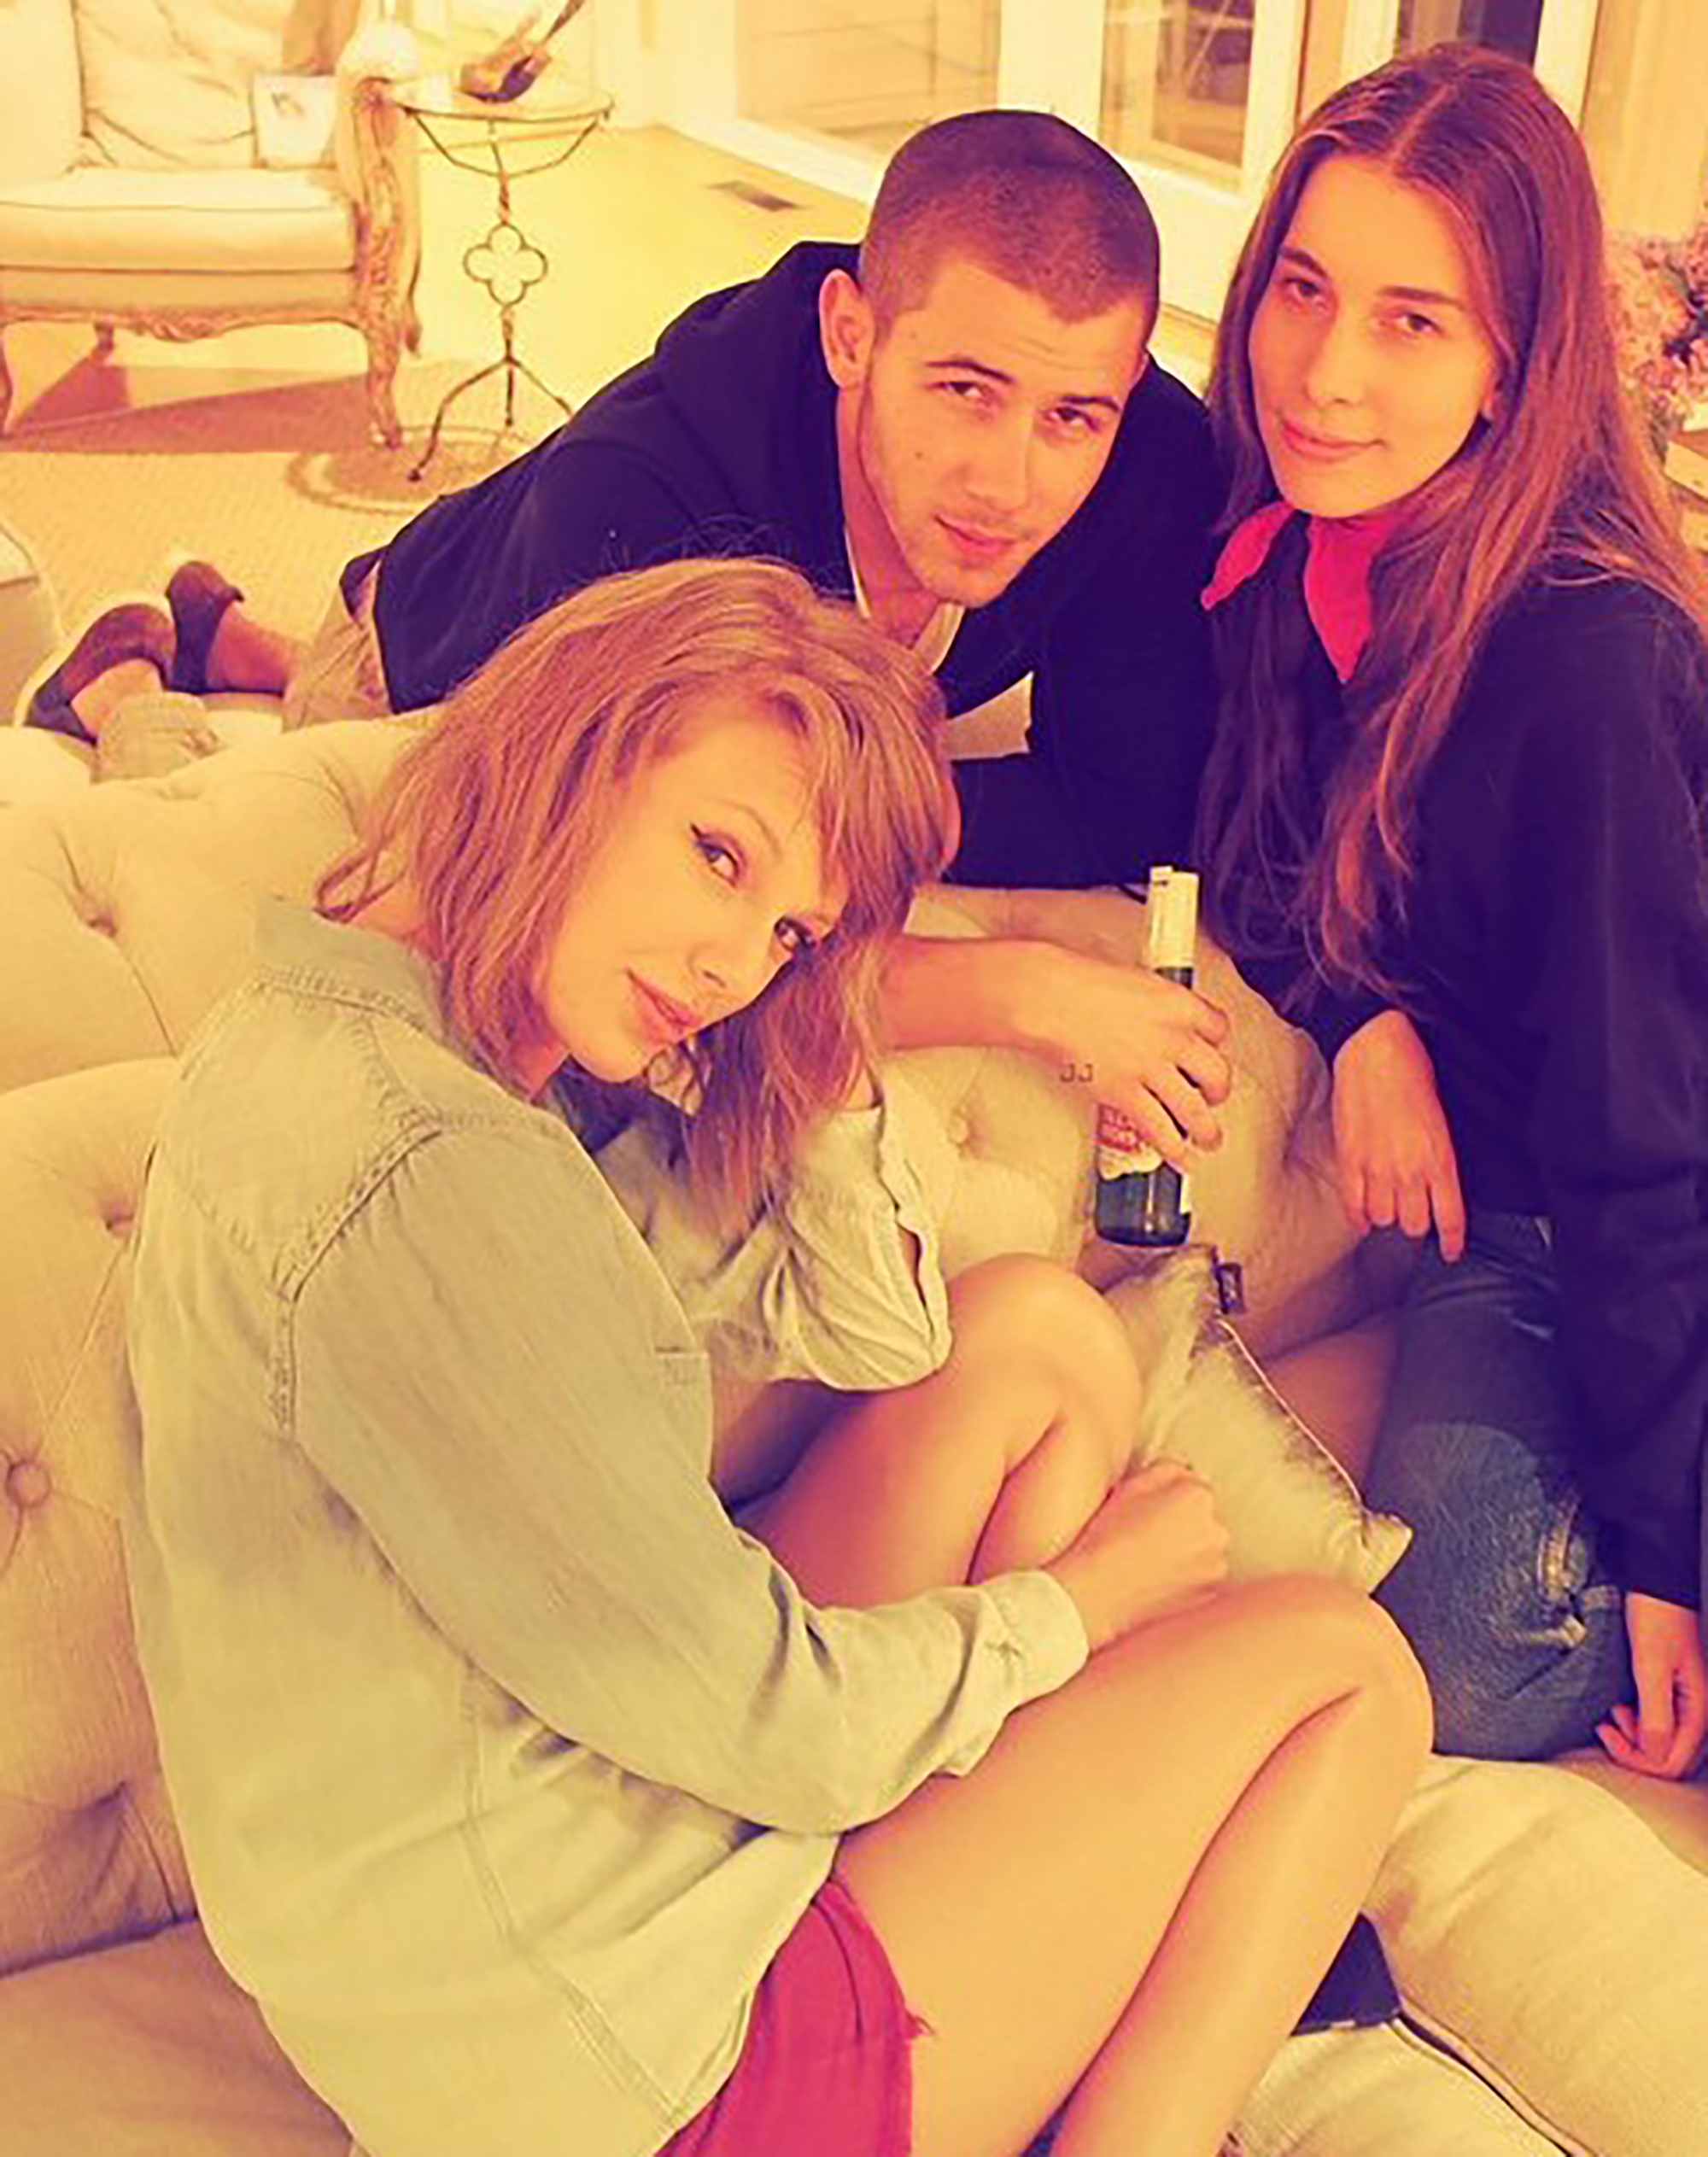 Taylor Swift and friends at her Rhode Island home.